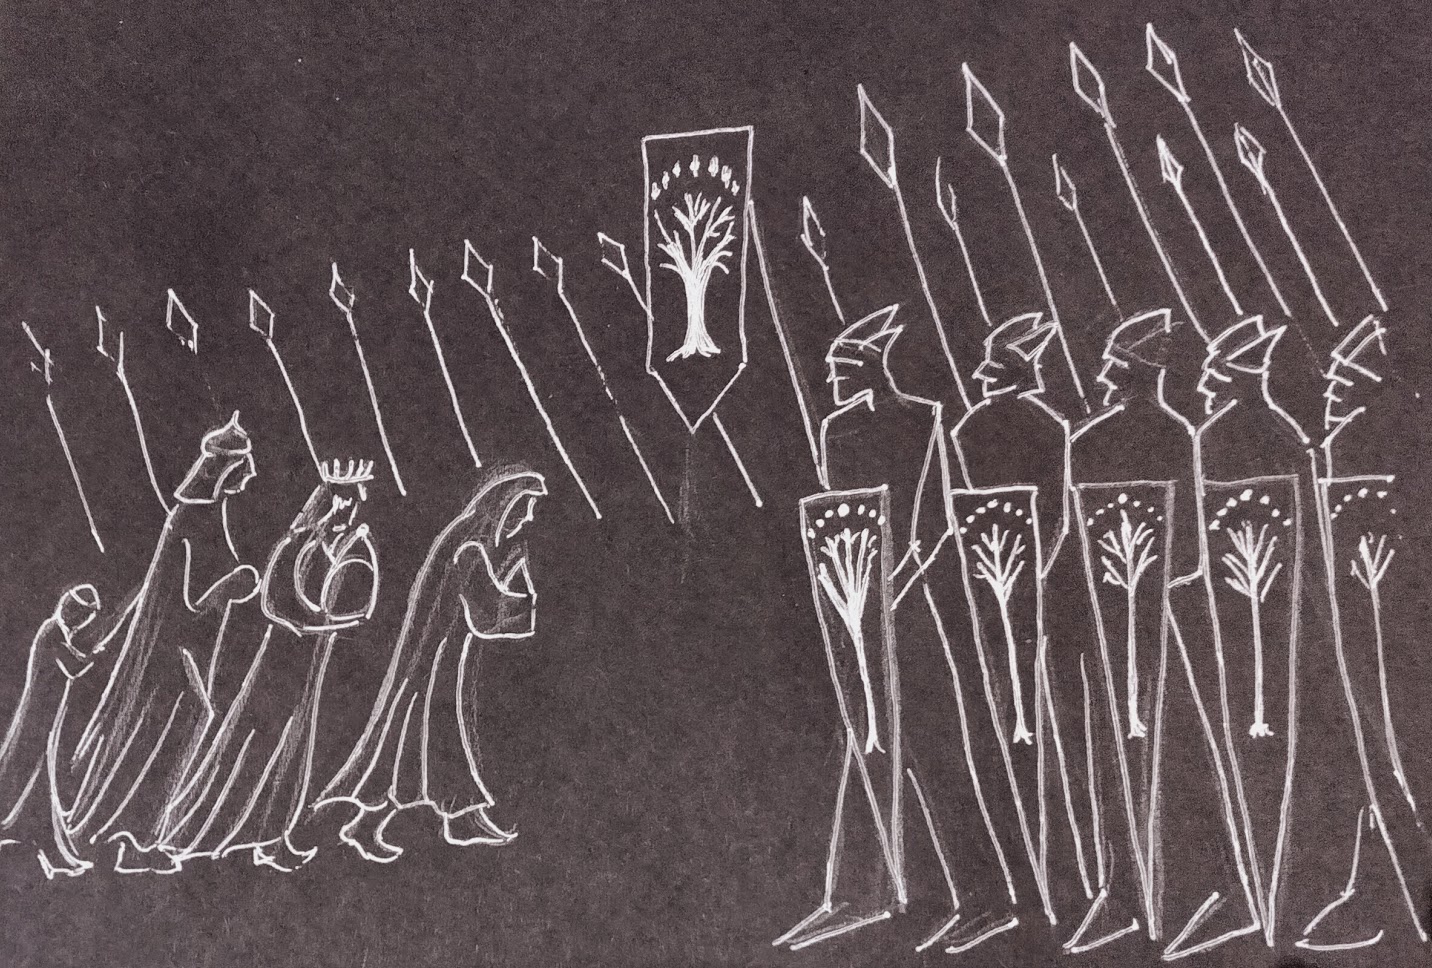 "Tribute to Gondor" by bunn. White drawing on a dark background of hostages walking toward Gondorians armed with spears.